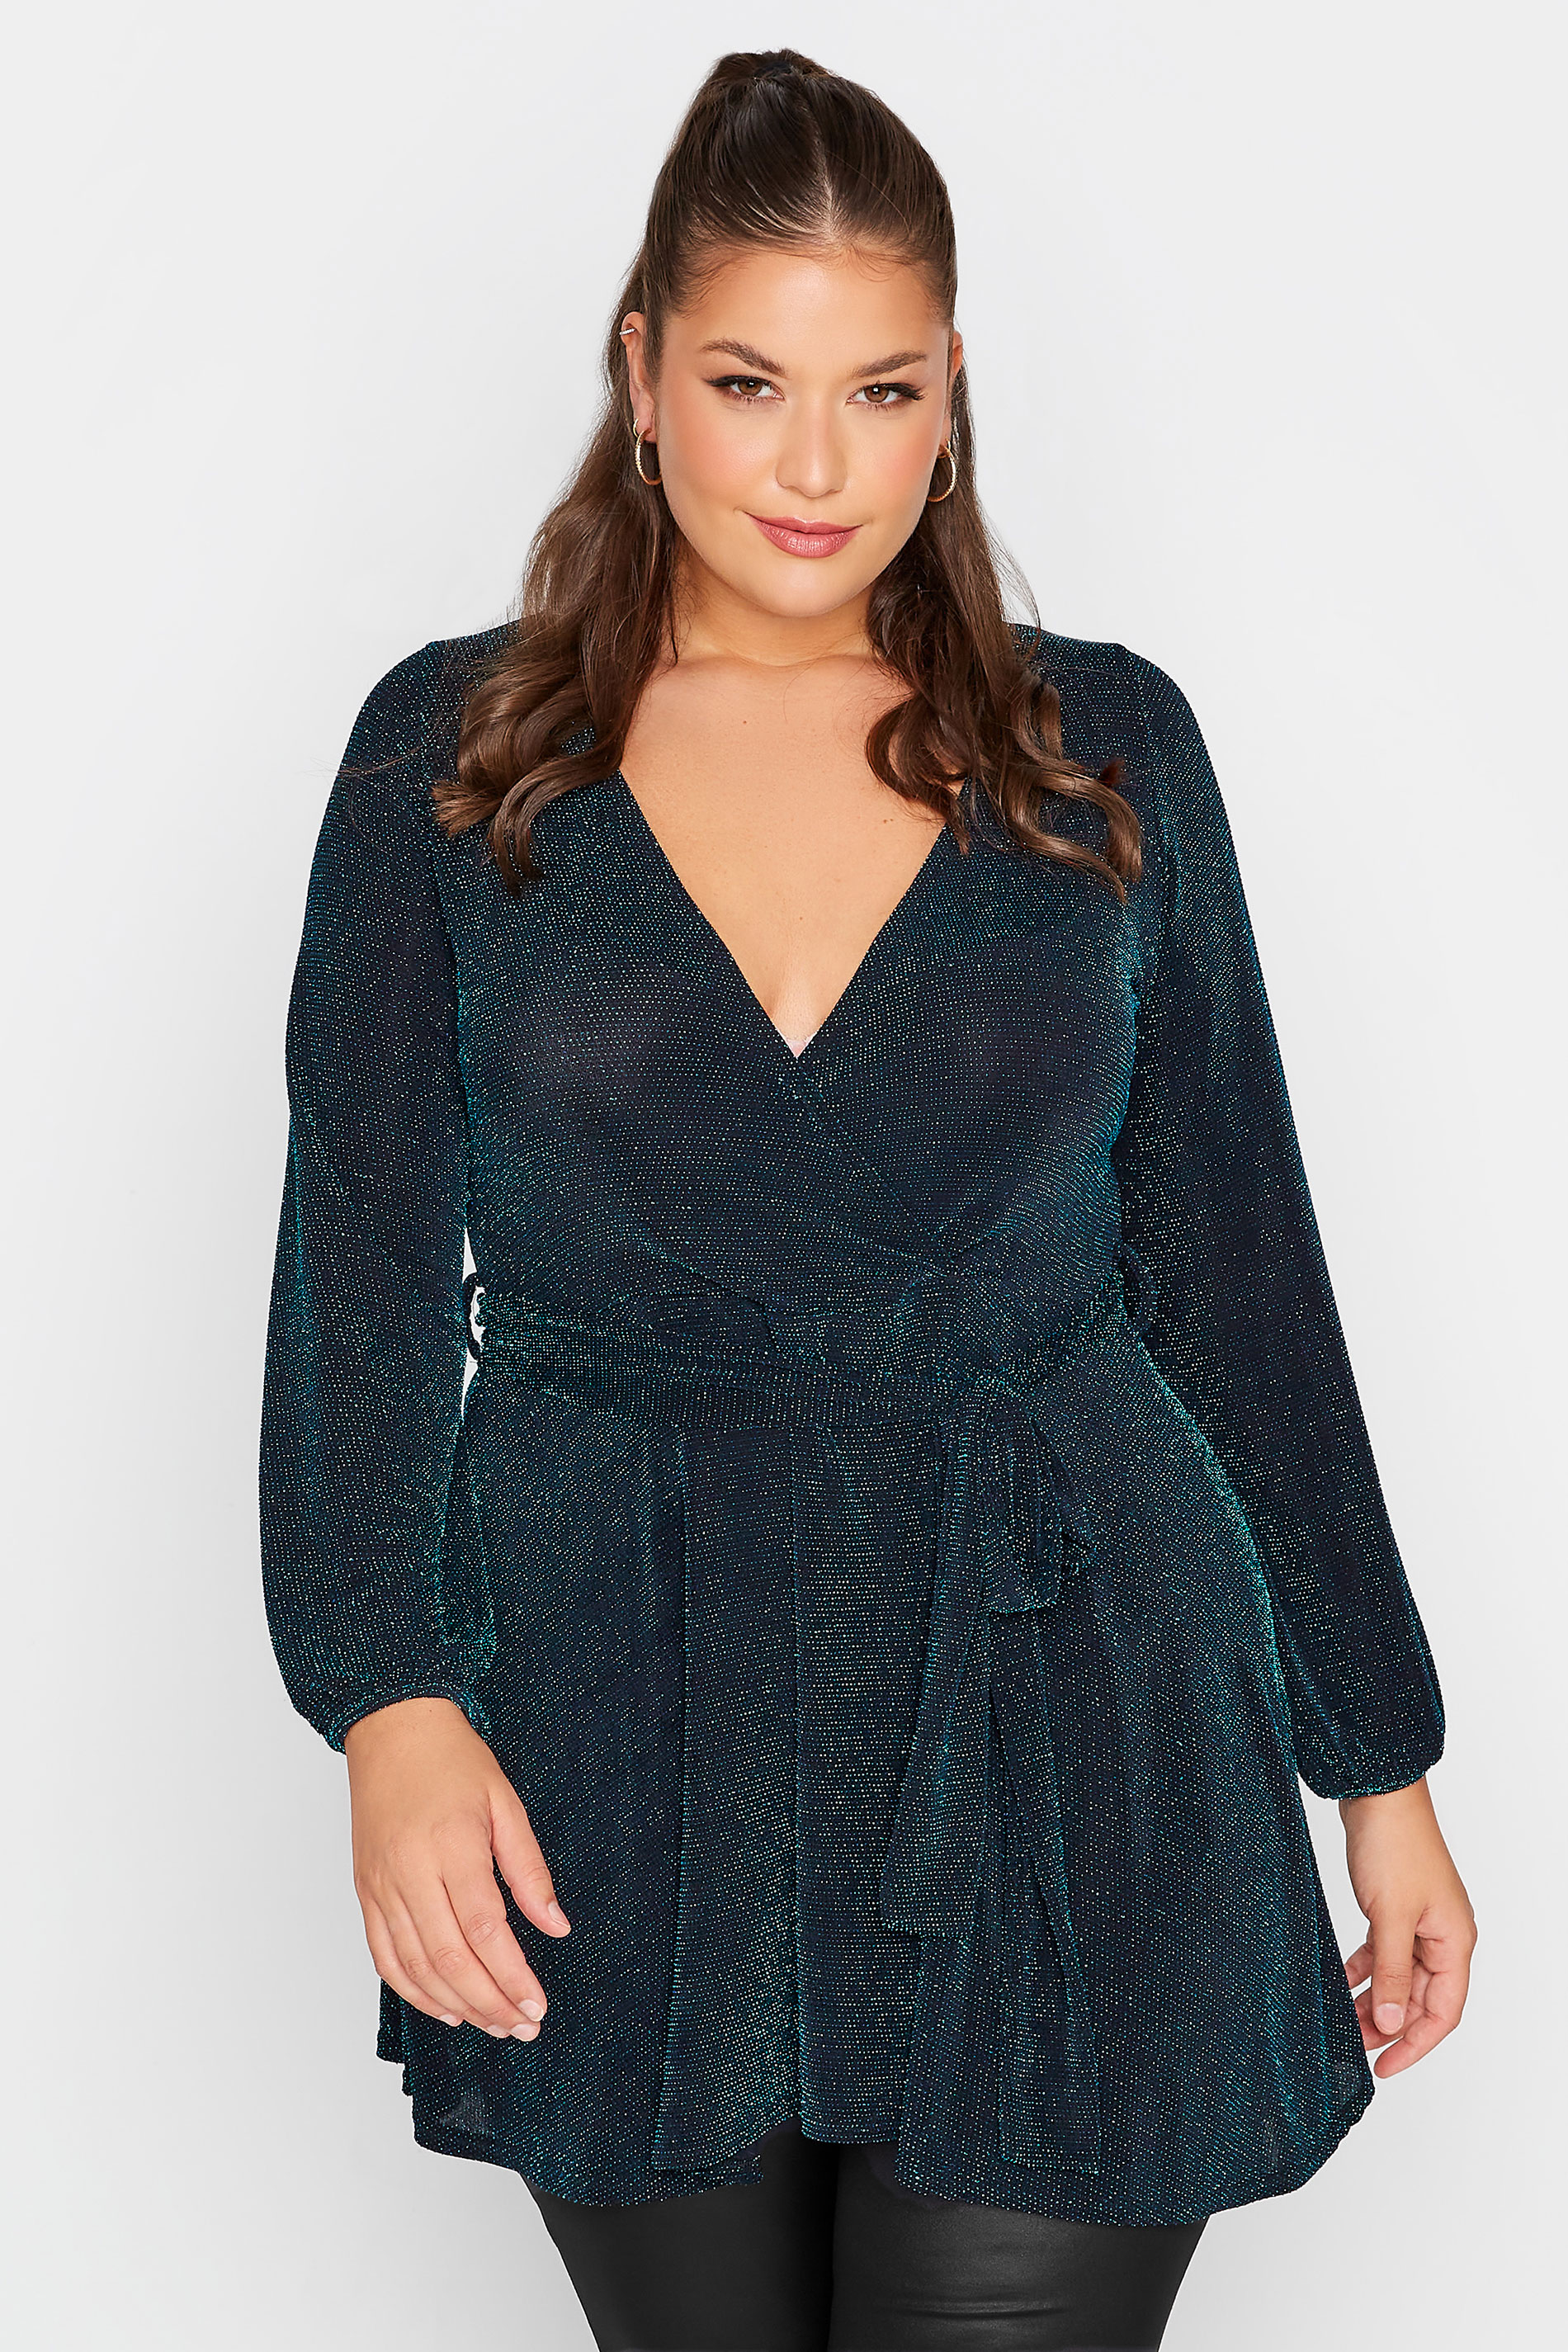 YOURS LONDON Plus Size Teal Blue Glitter Wrap Top | Yours Clothing 1